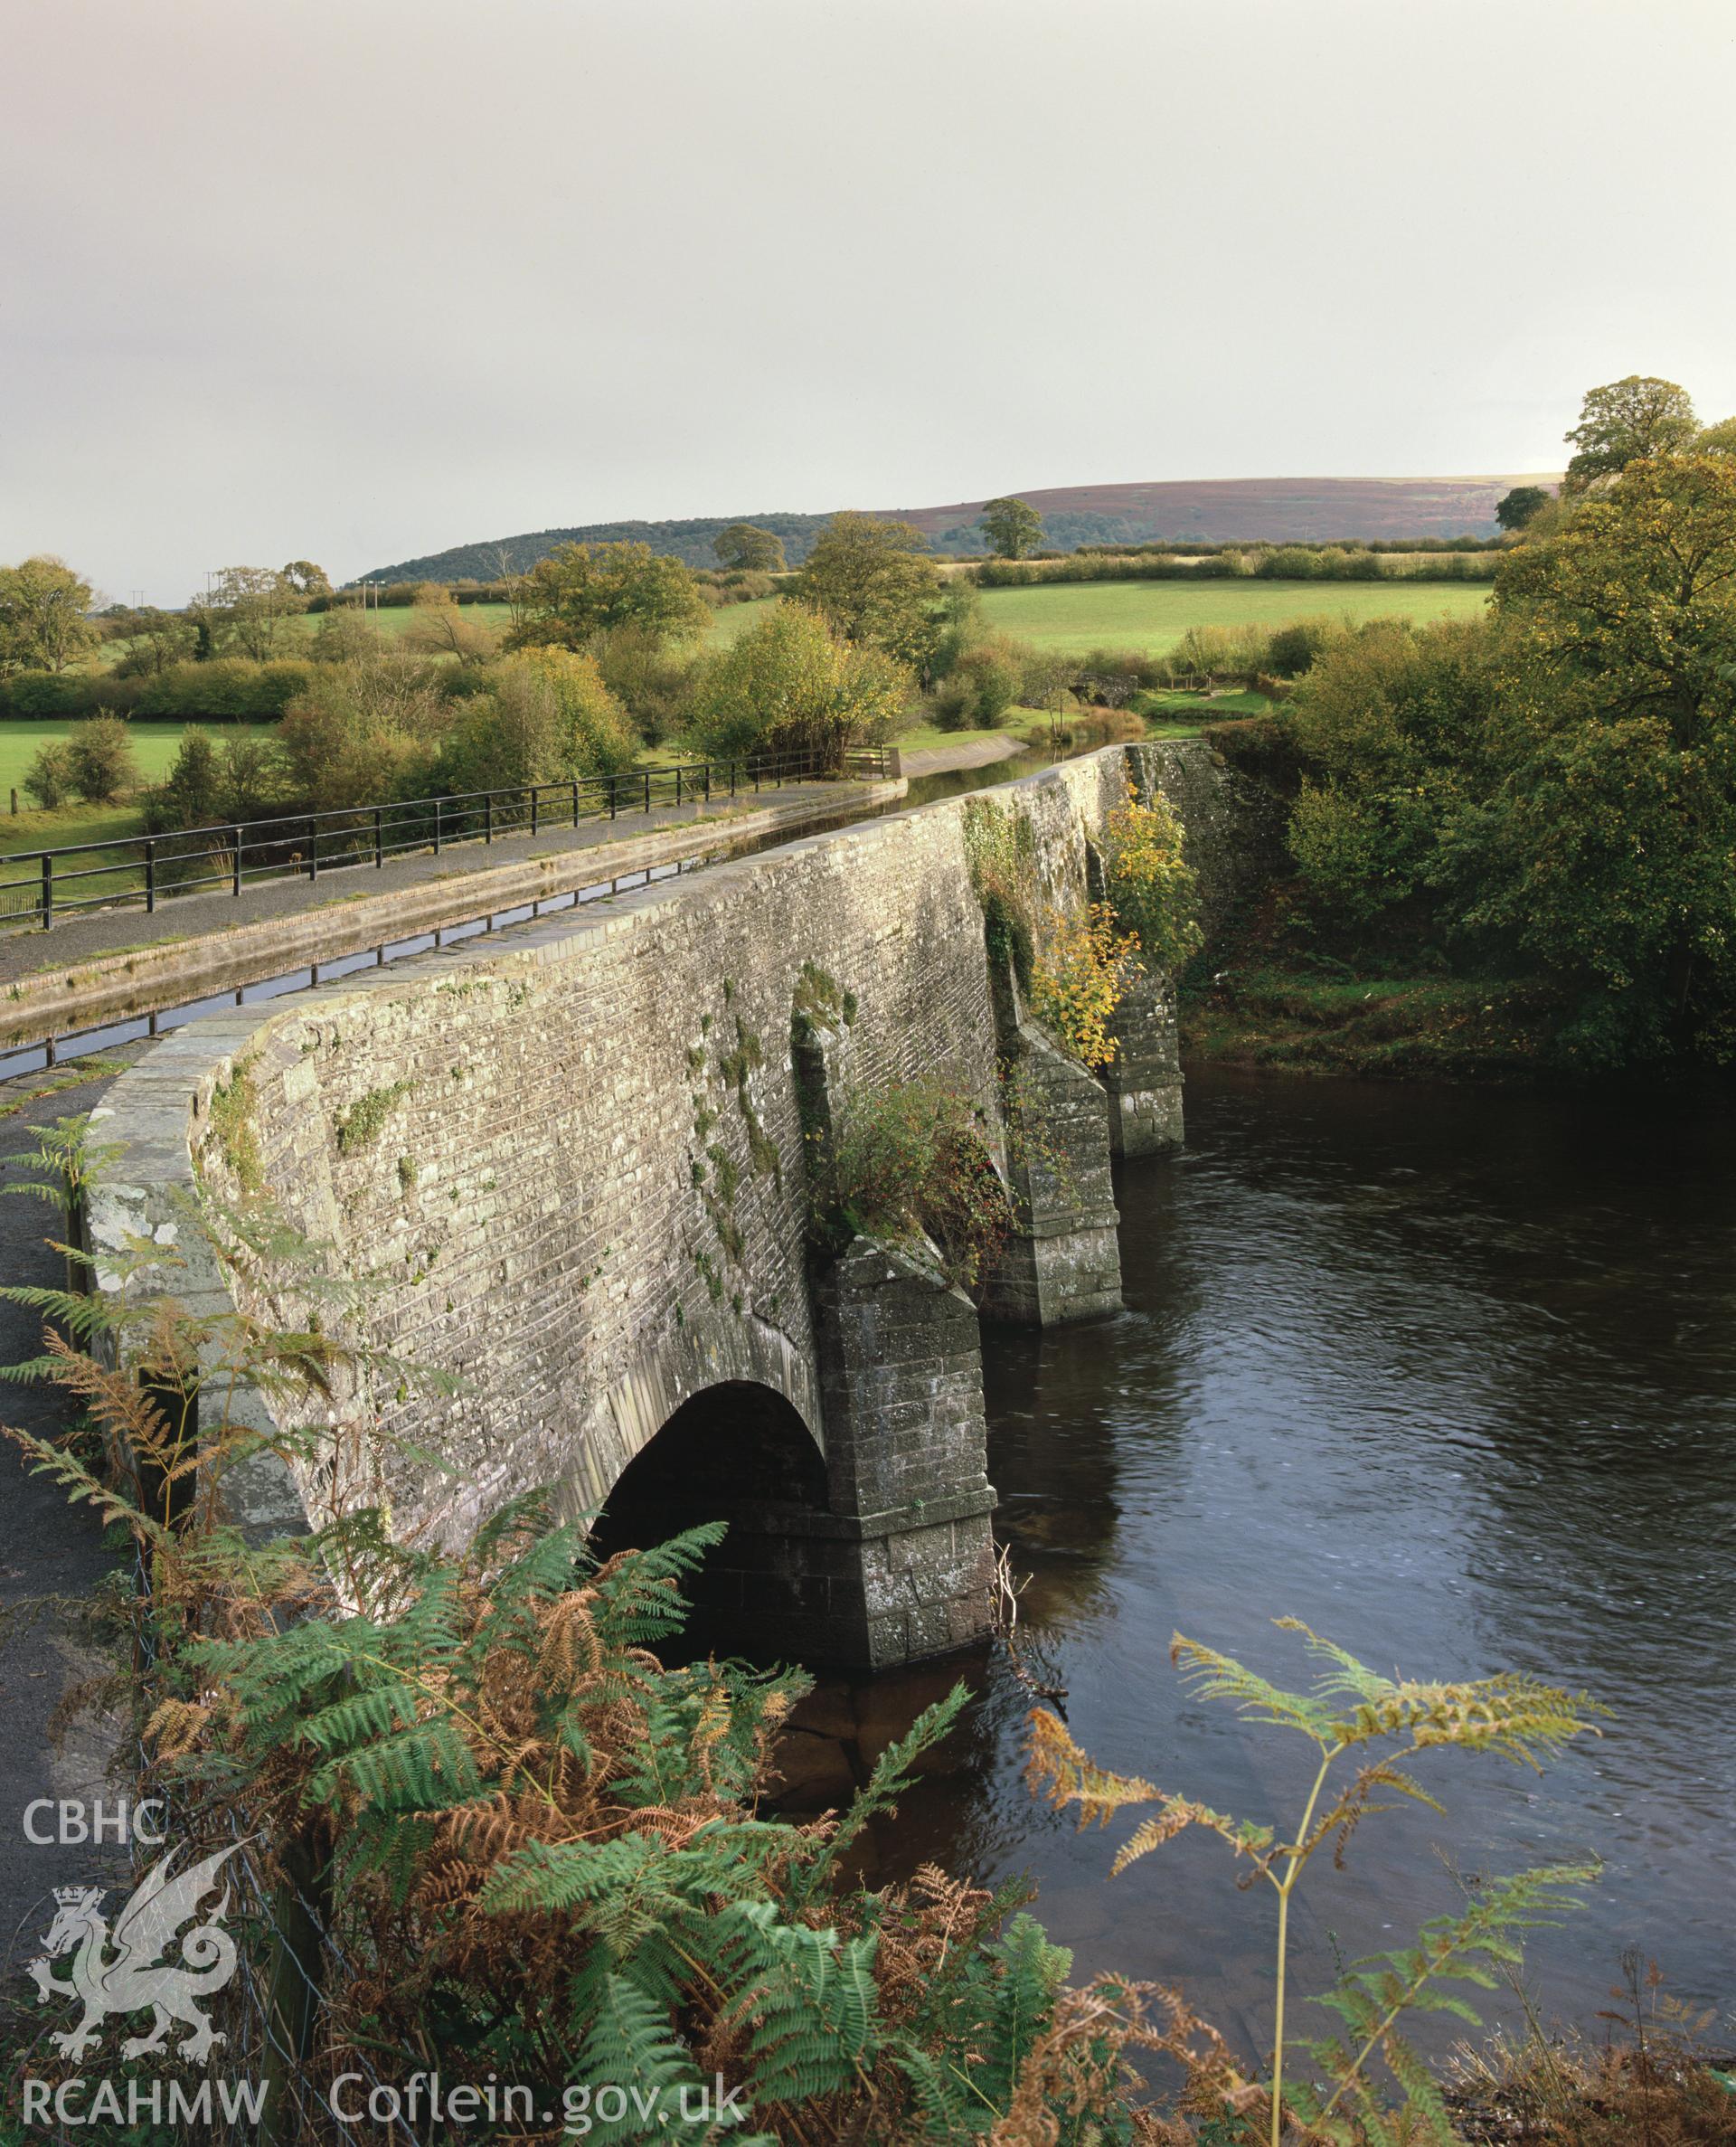 Colour transparency showing a view of Brynich Aqueduct, produced by Iain Wright 1990